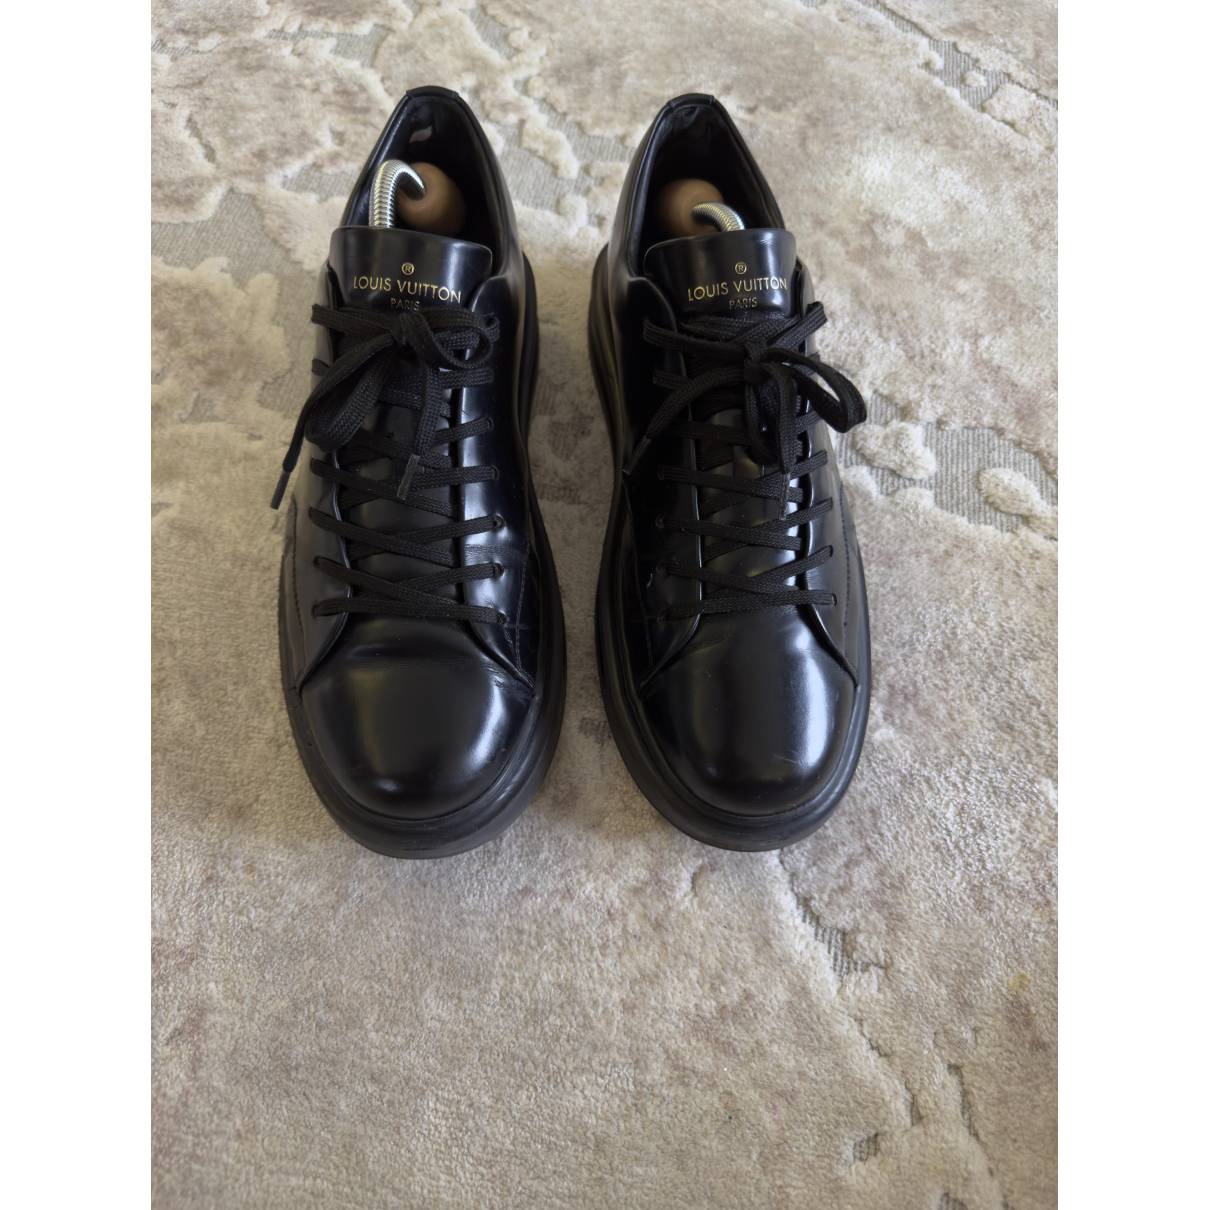 Beverly hills leather low trainers Louis Vuitton Black size 41.5